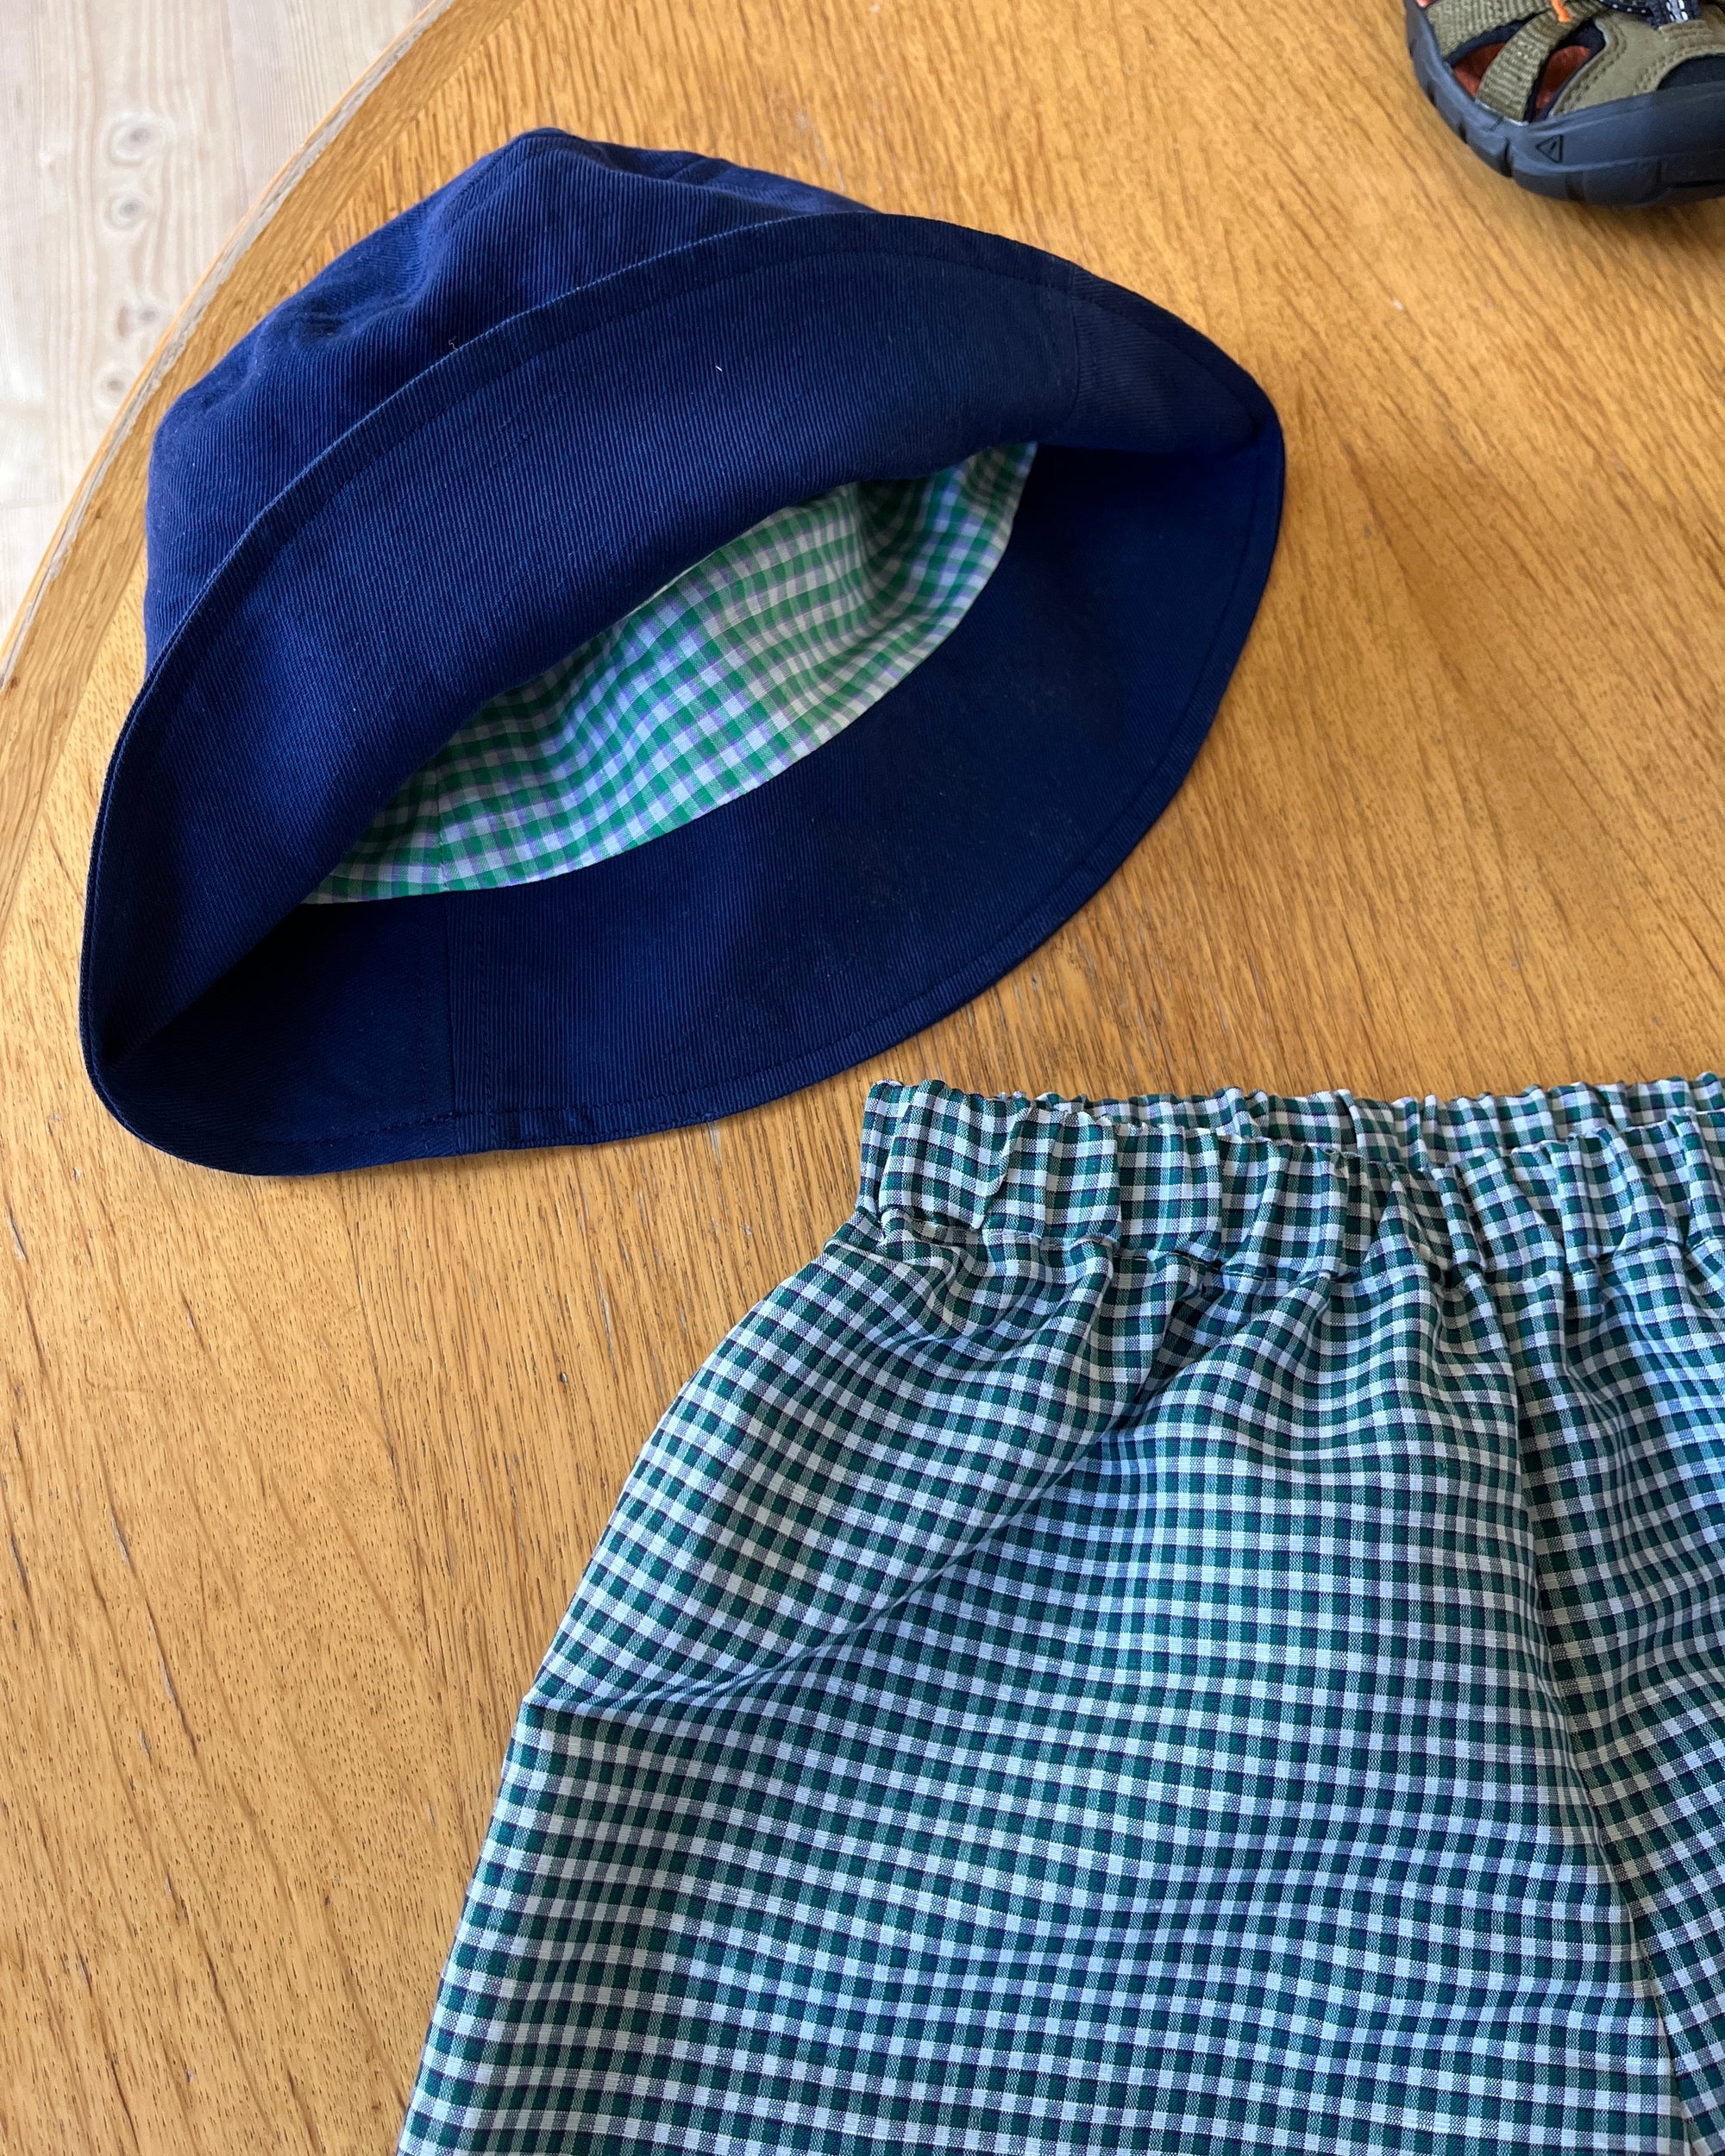 Sewing Project No. 02: Favorite Pants Mini + Bucket Hat